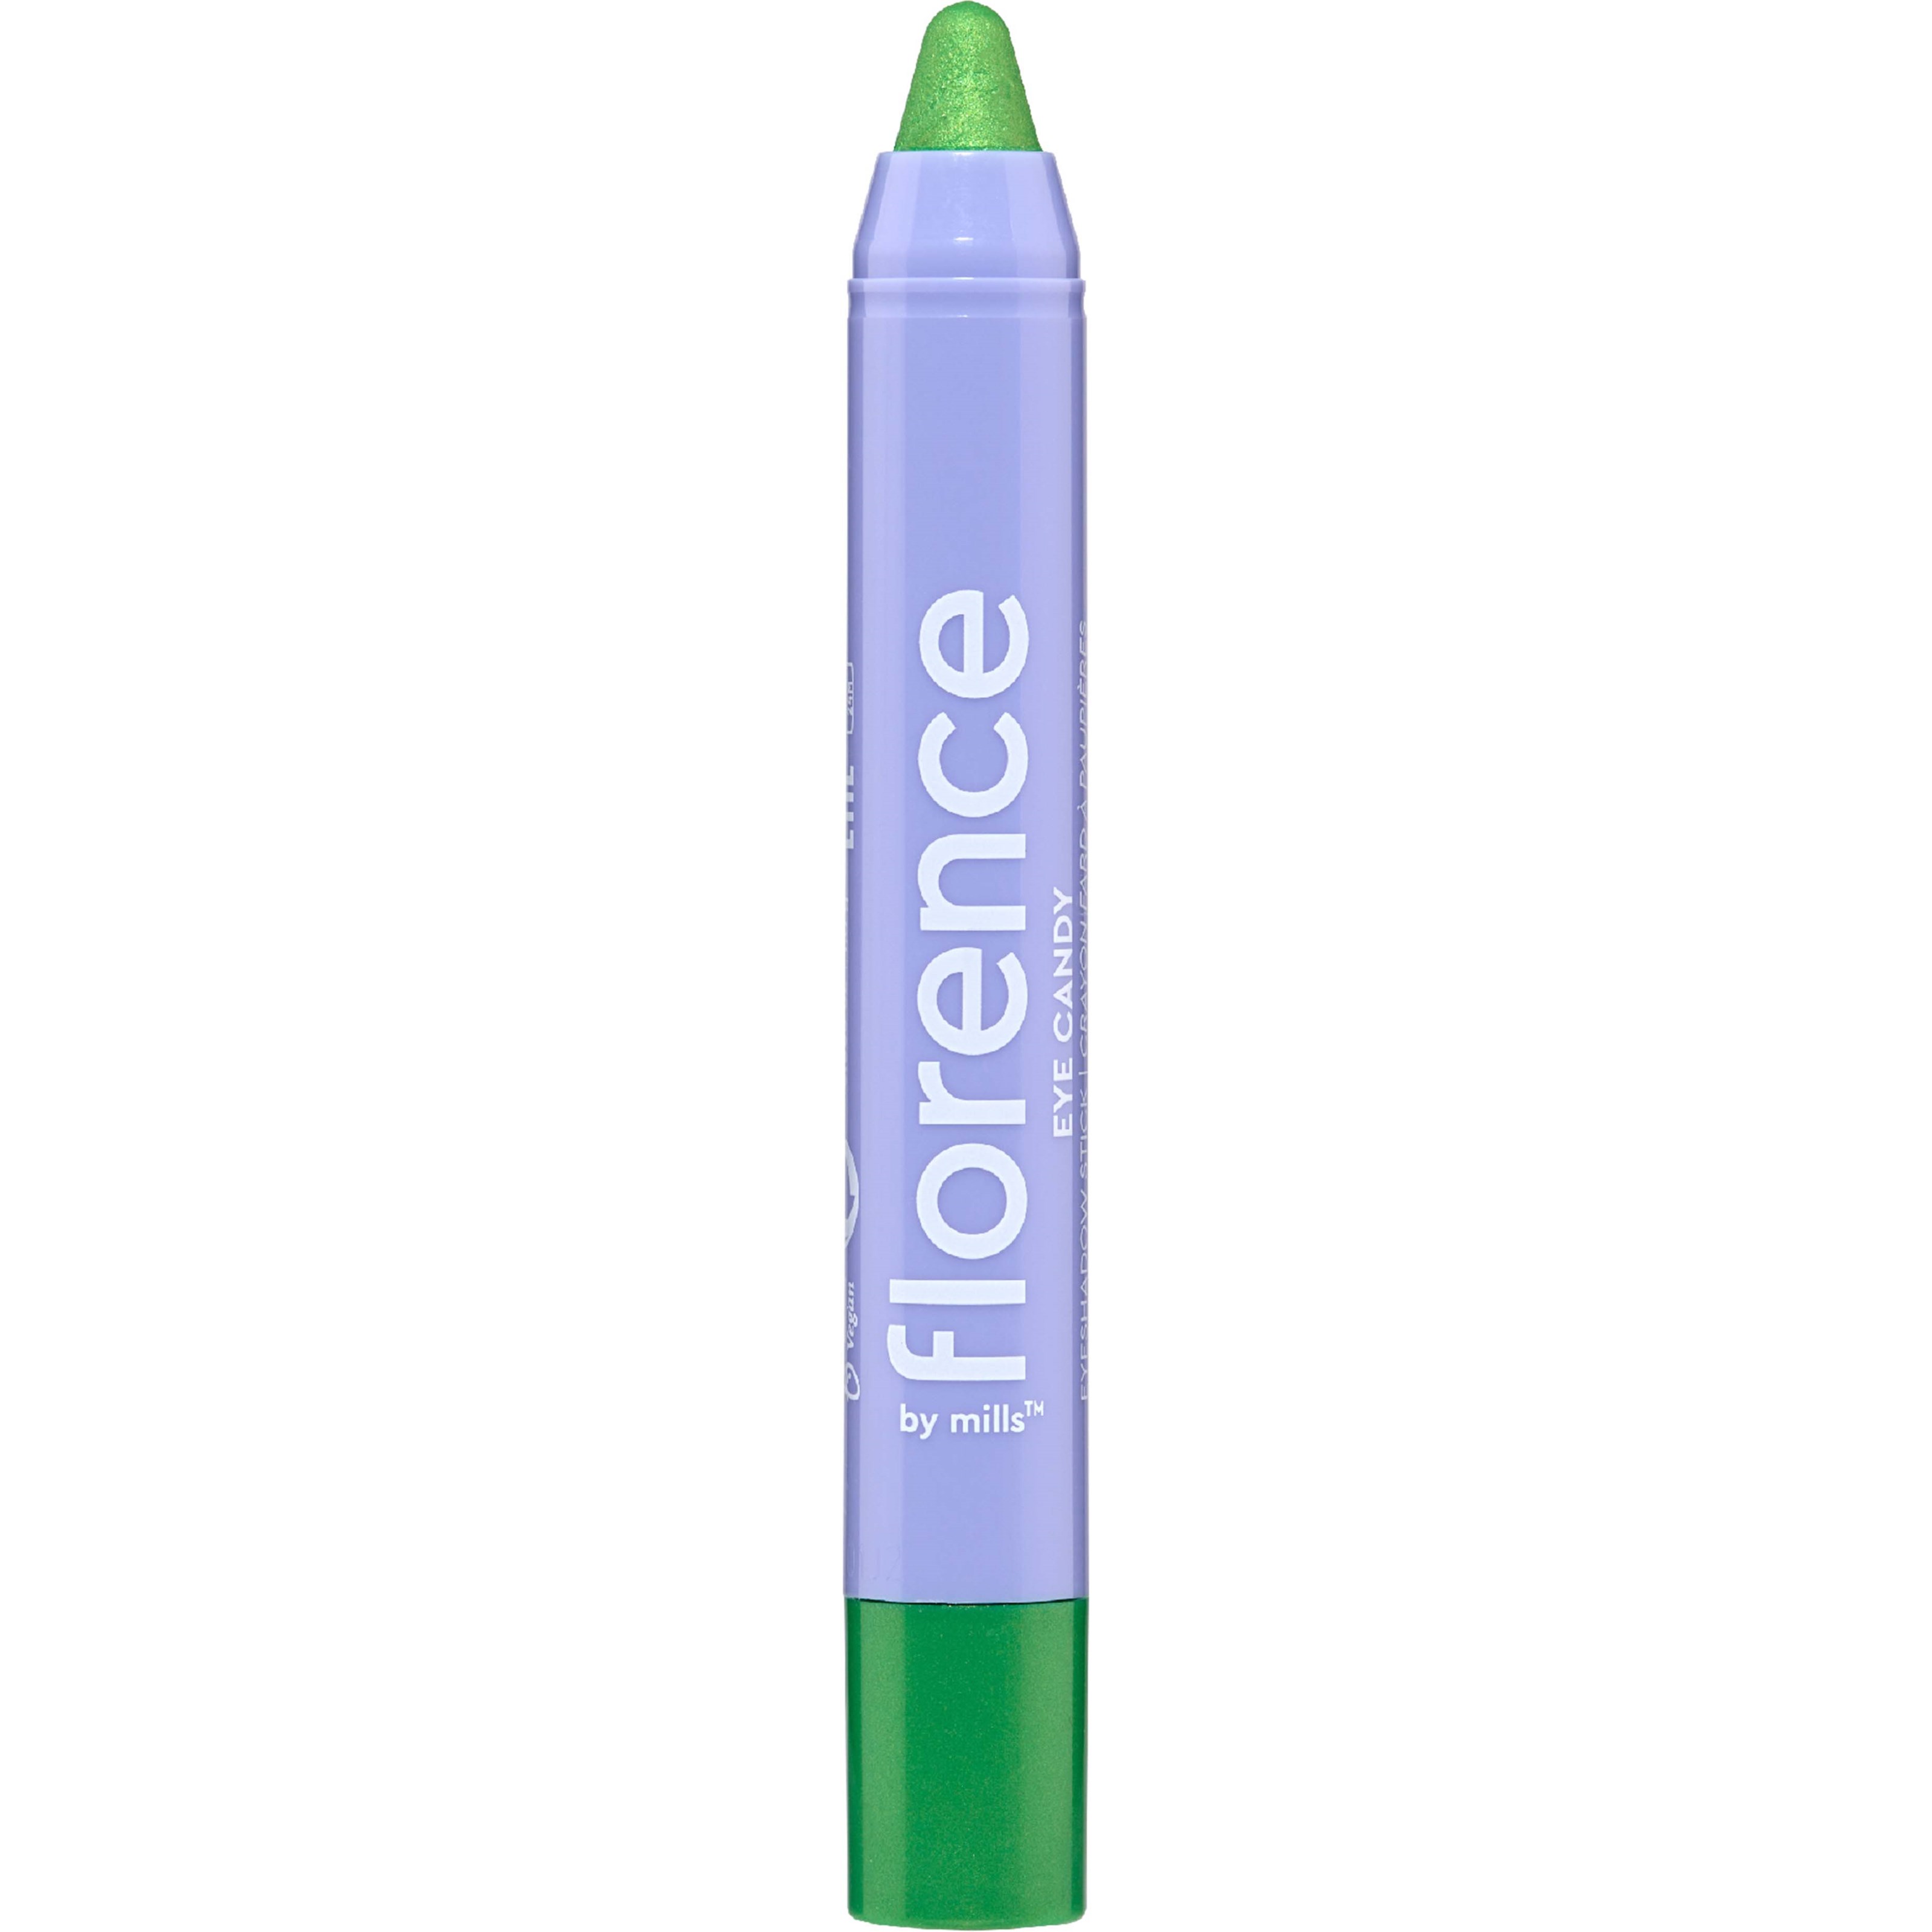 Florence By Mills Eyecandy Eyeshadow Stick Sour Apple (Electric Metall